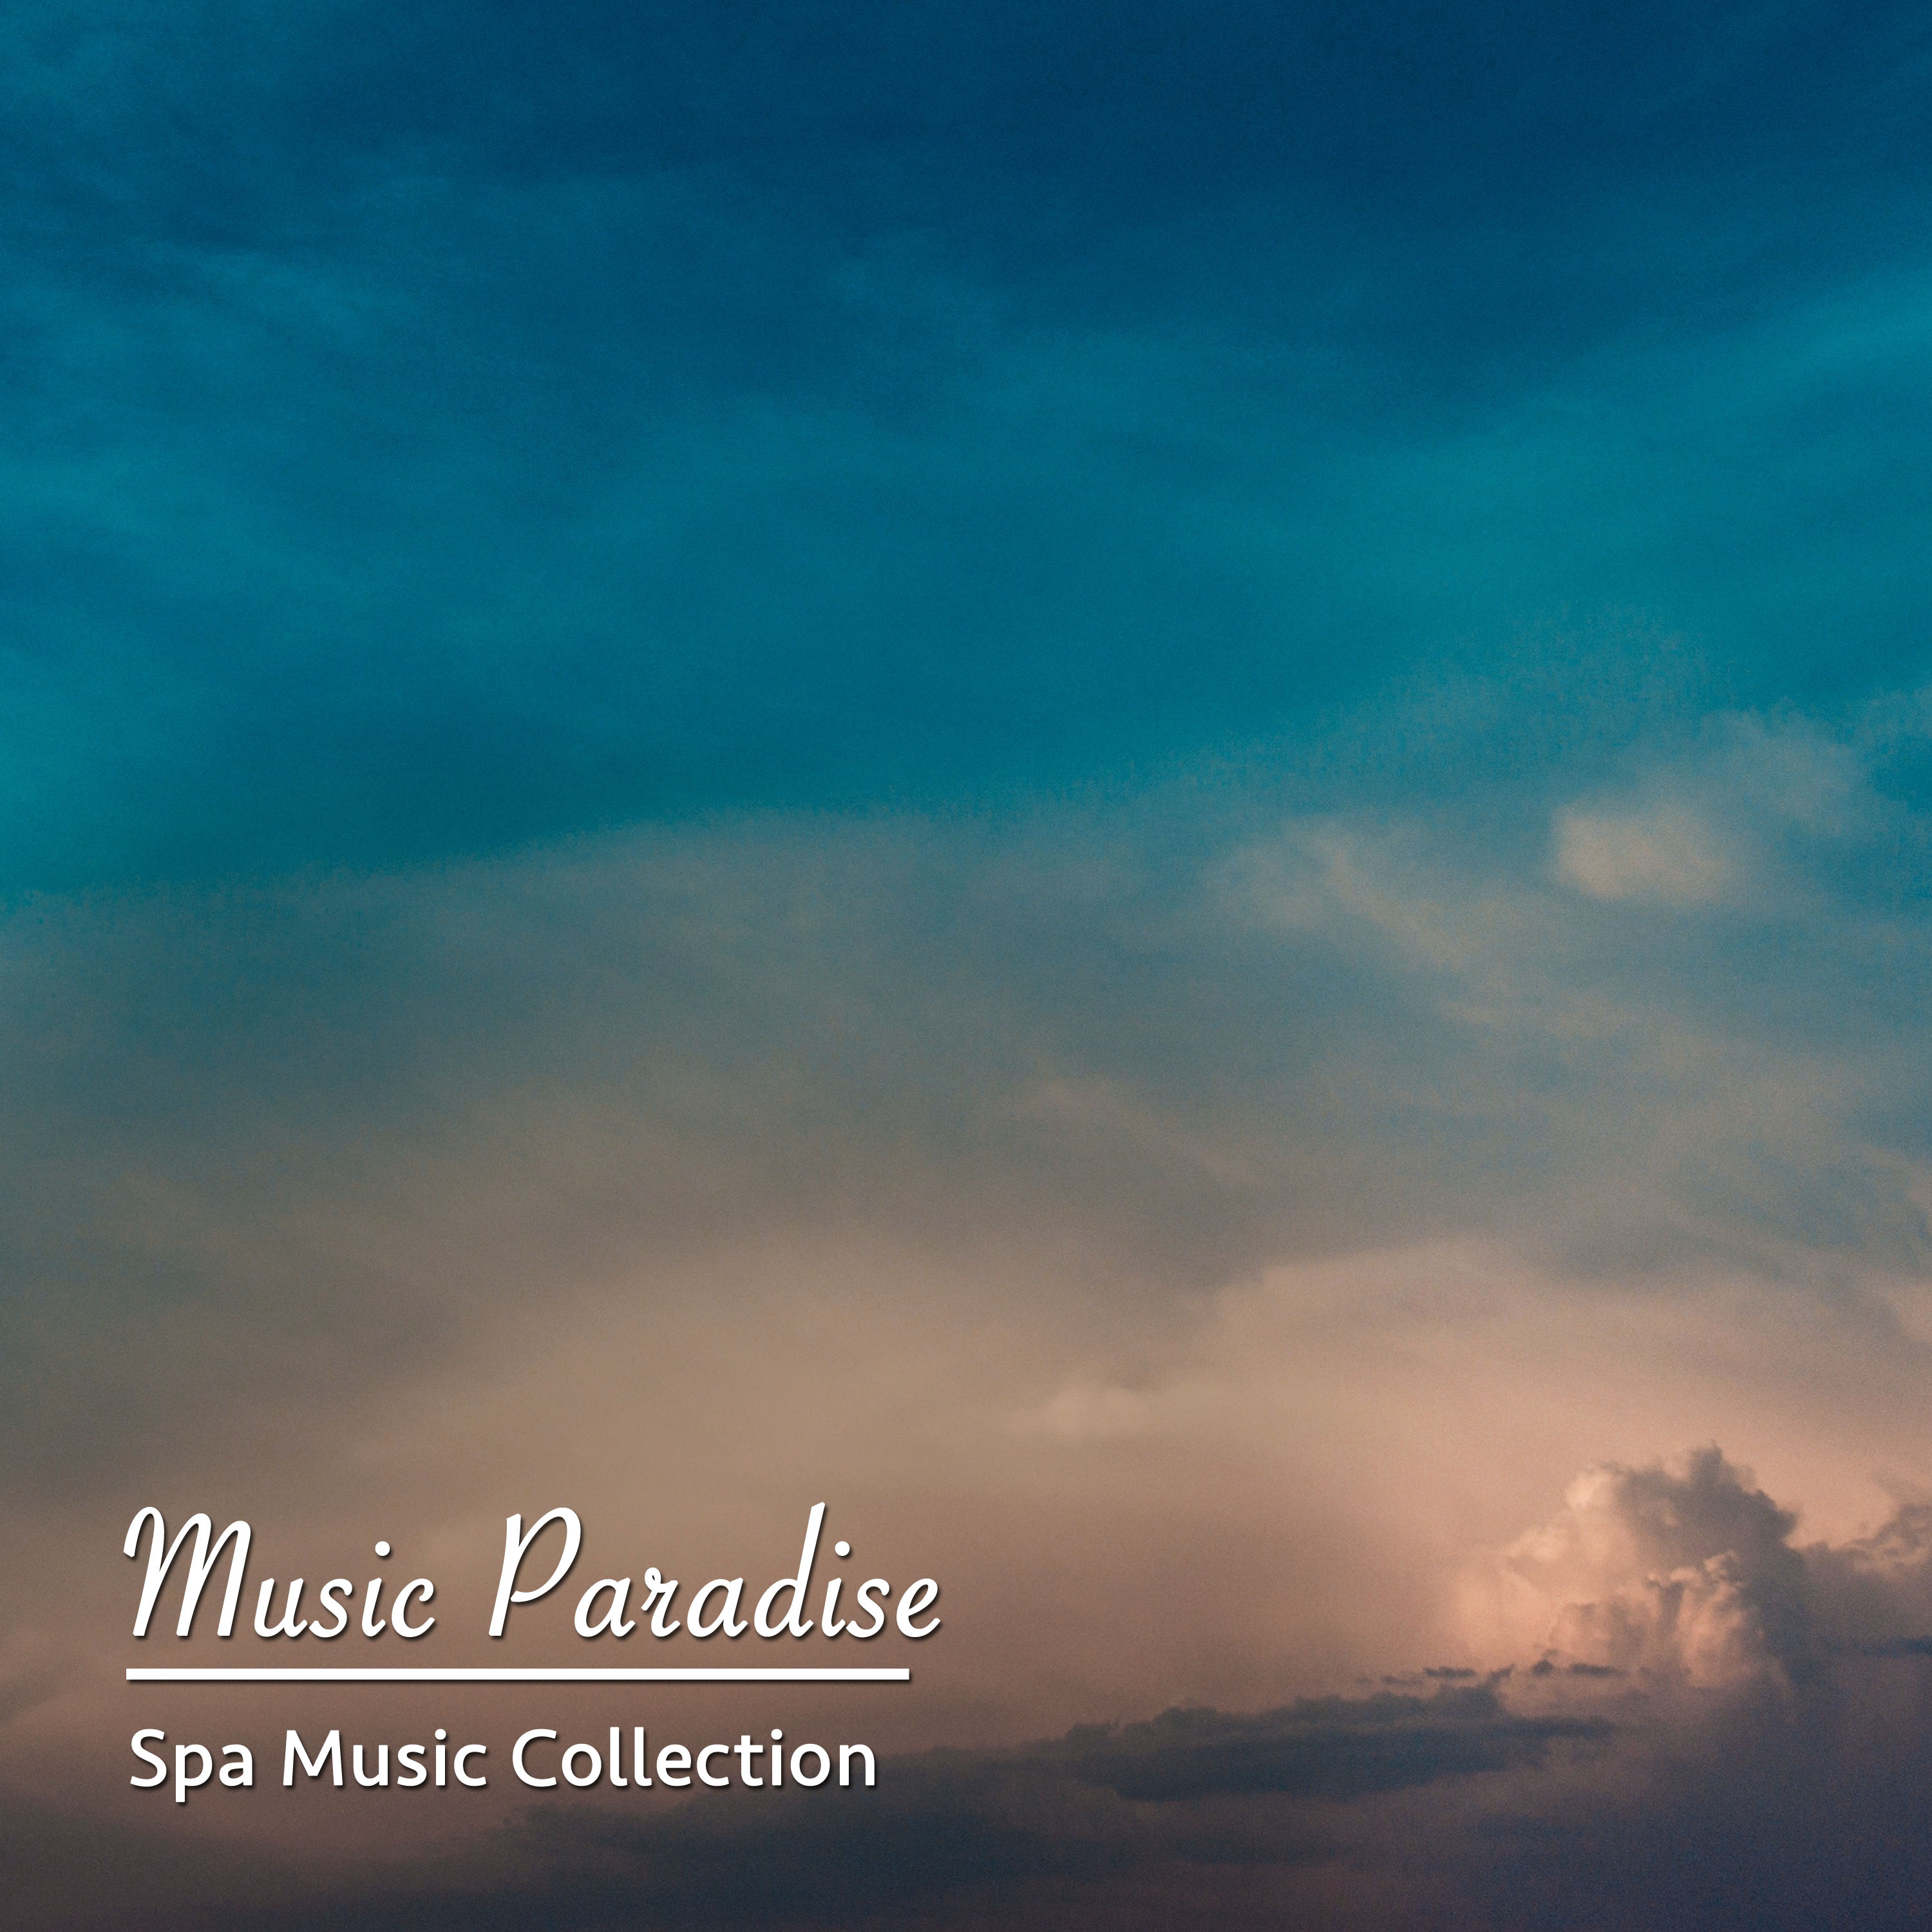 18 Music Paradise: Spa Music Collection